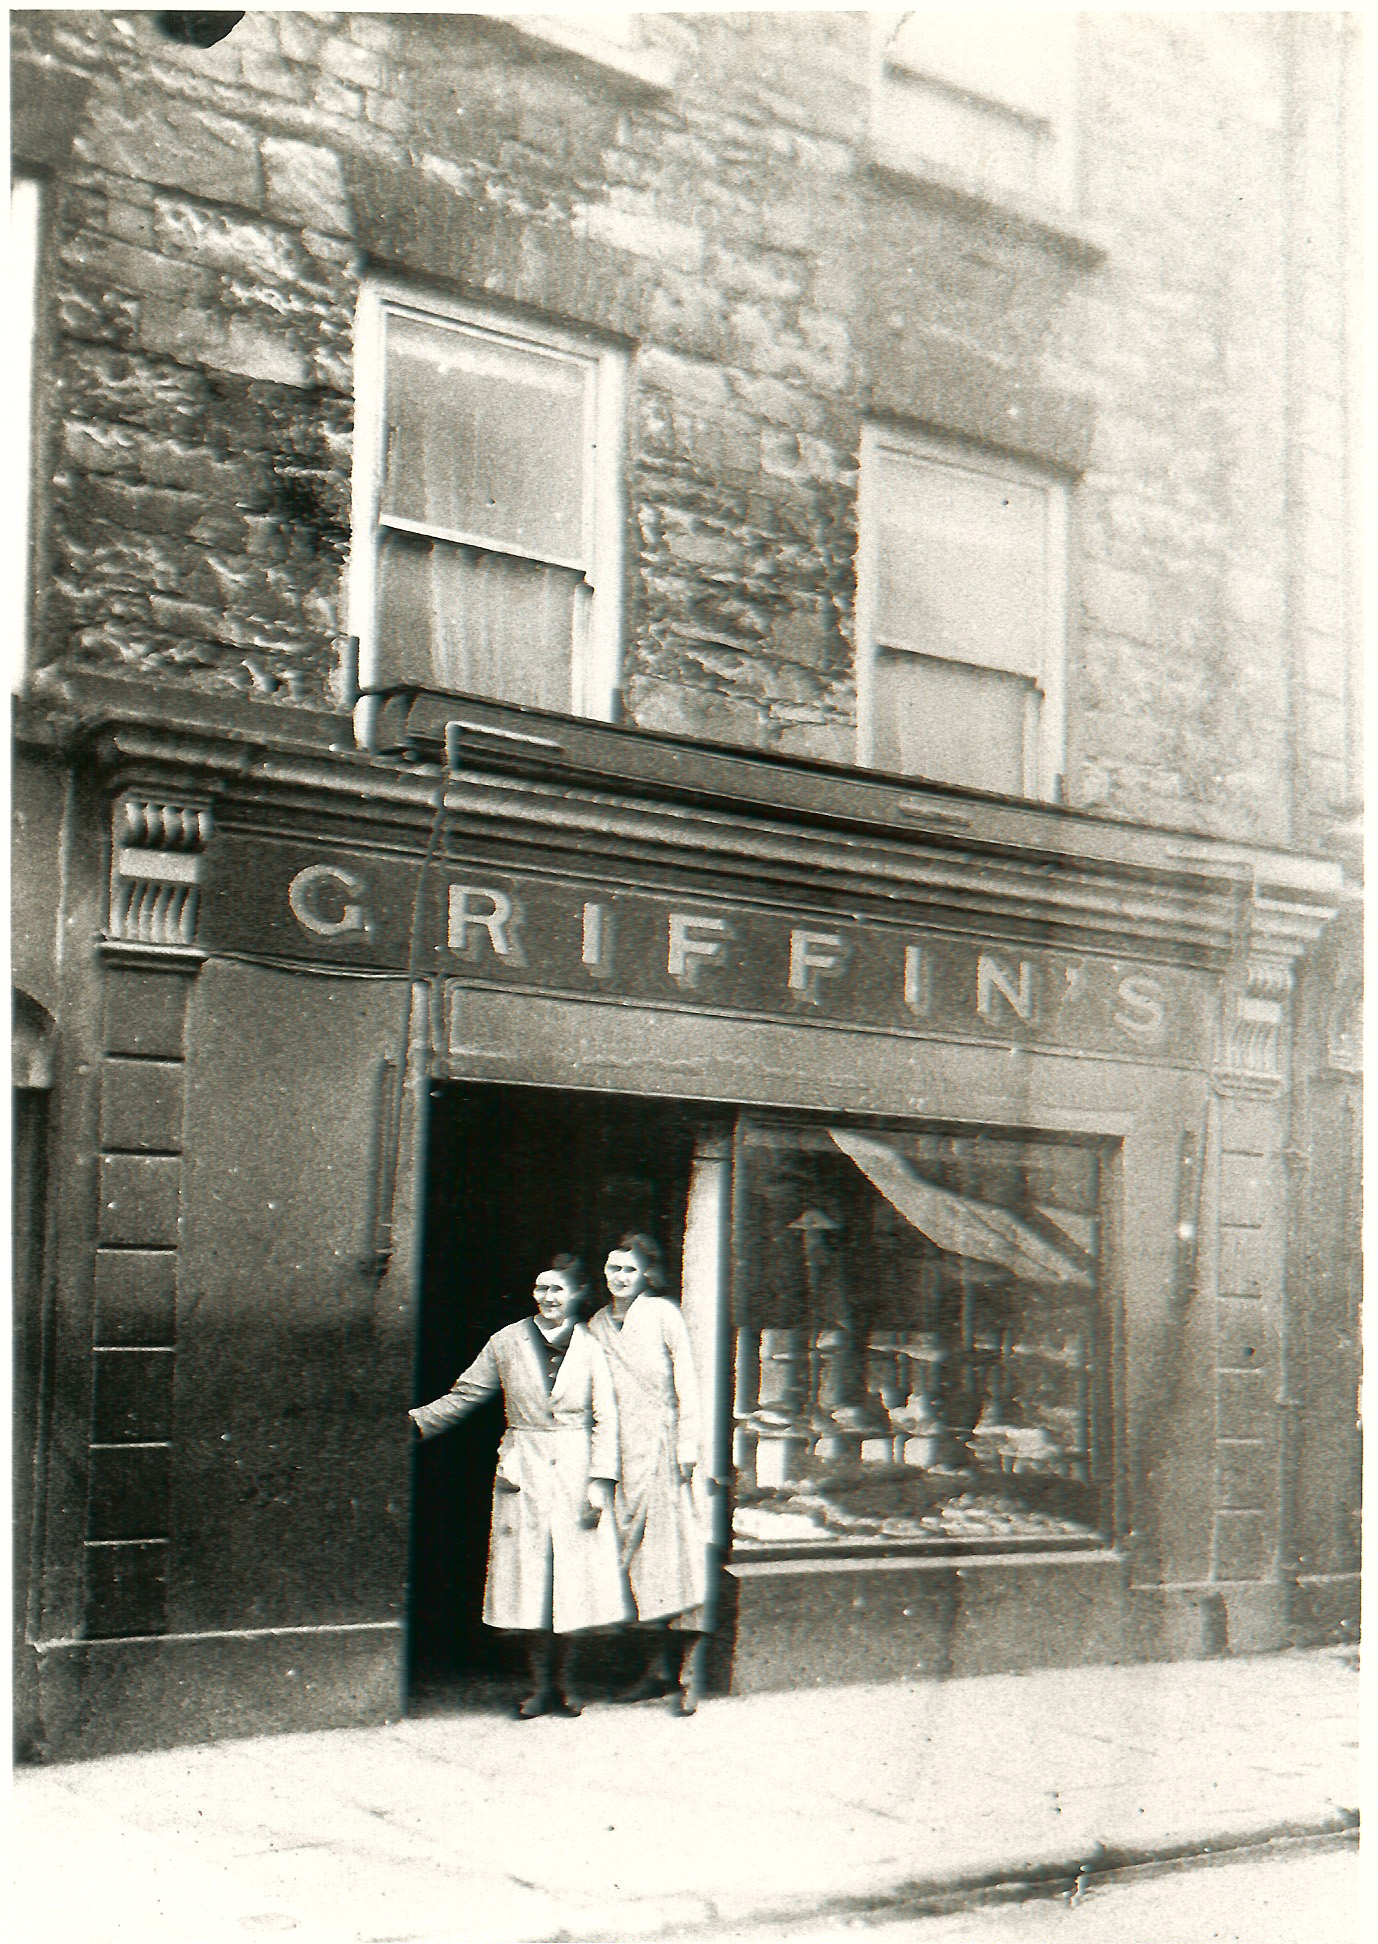 Griffin Bakery